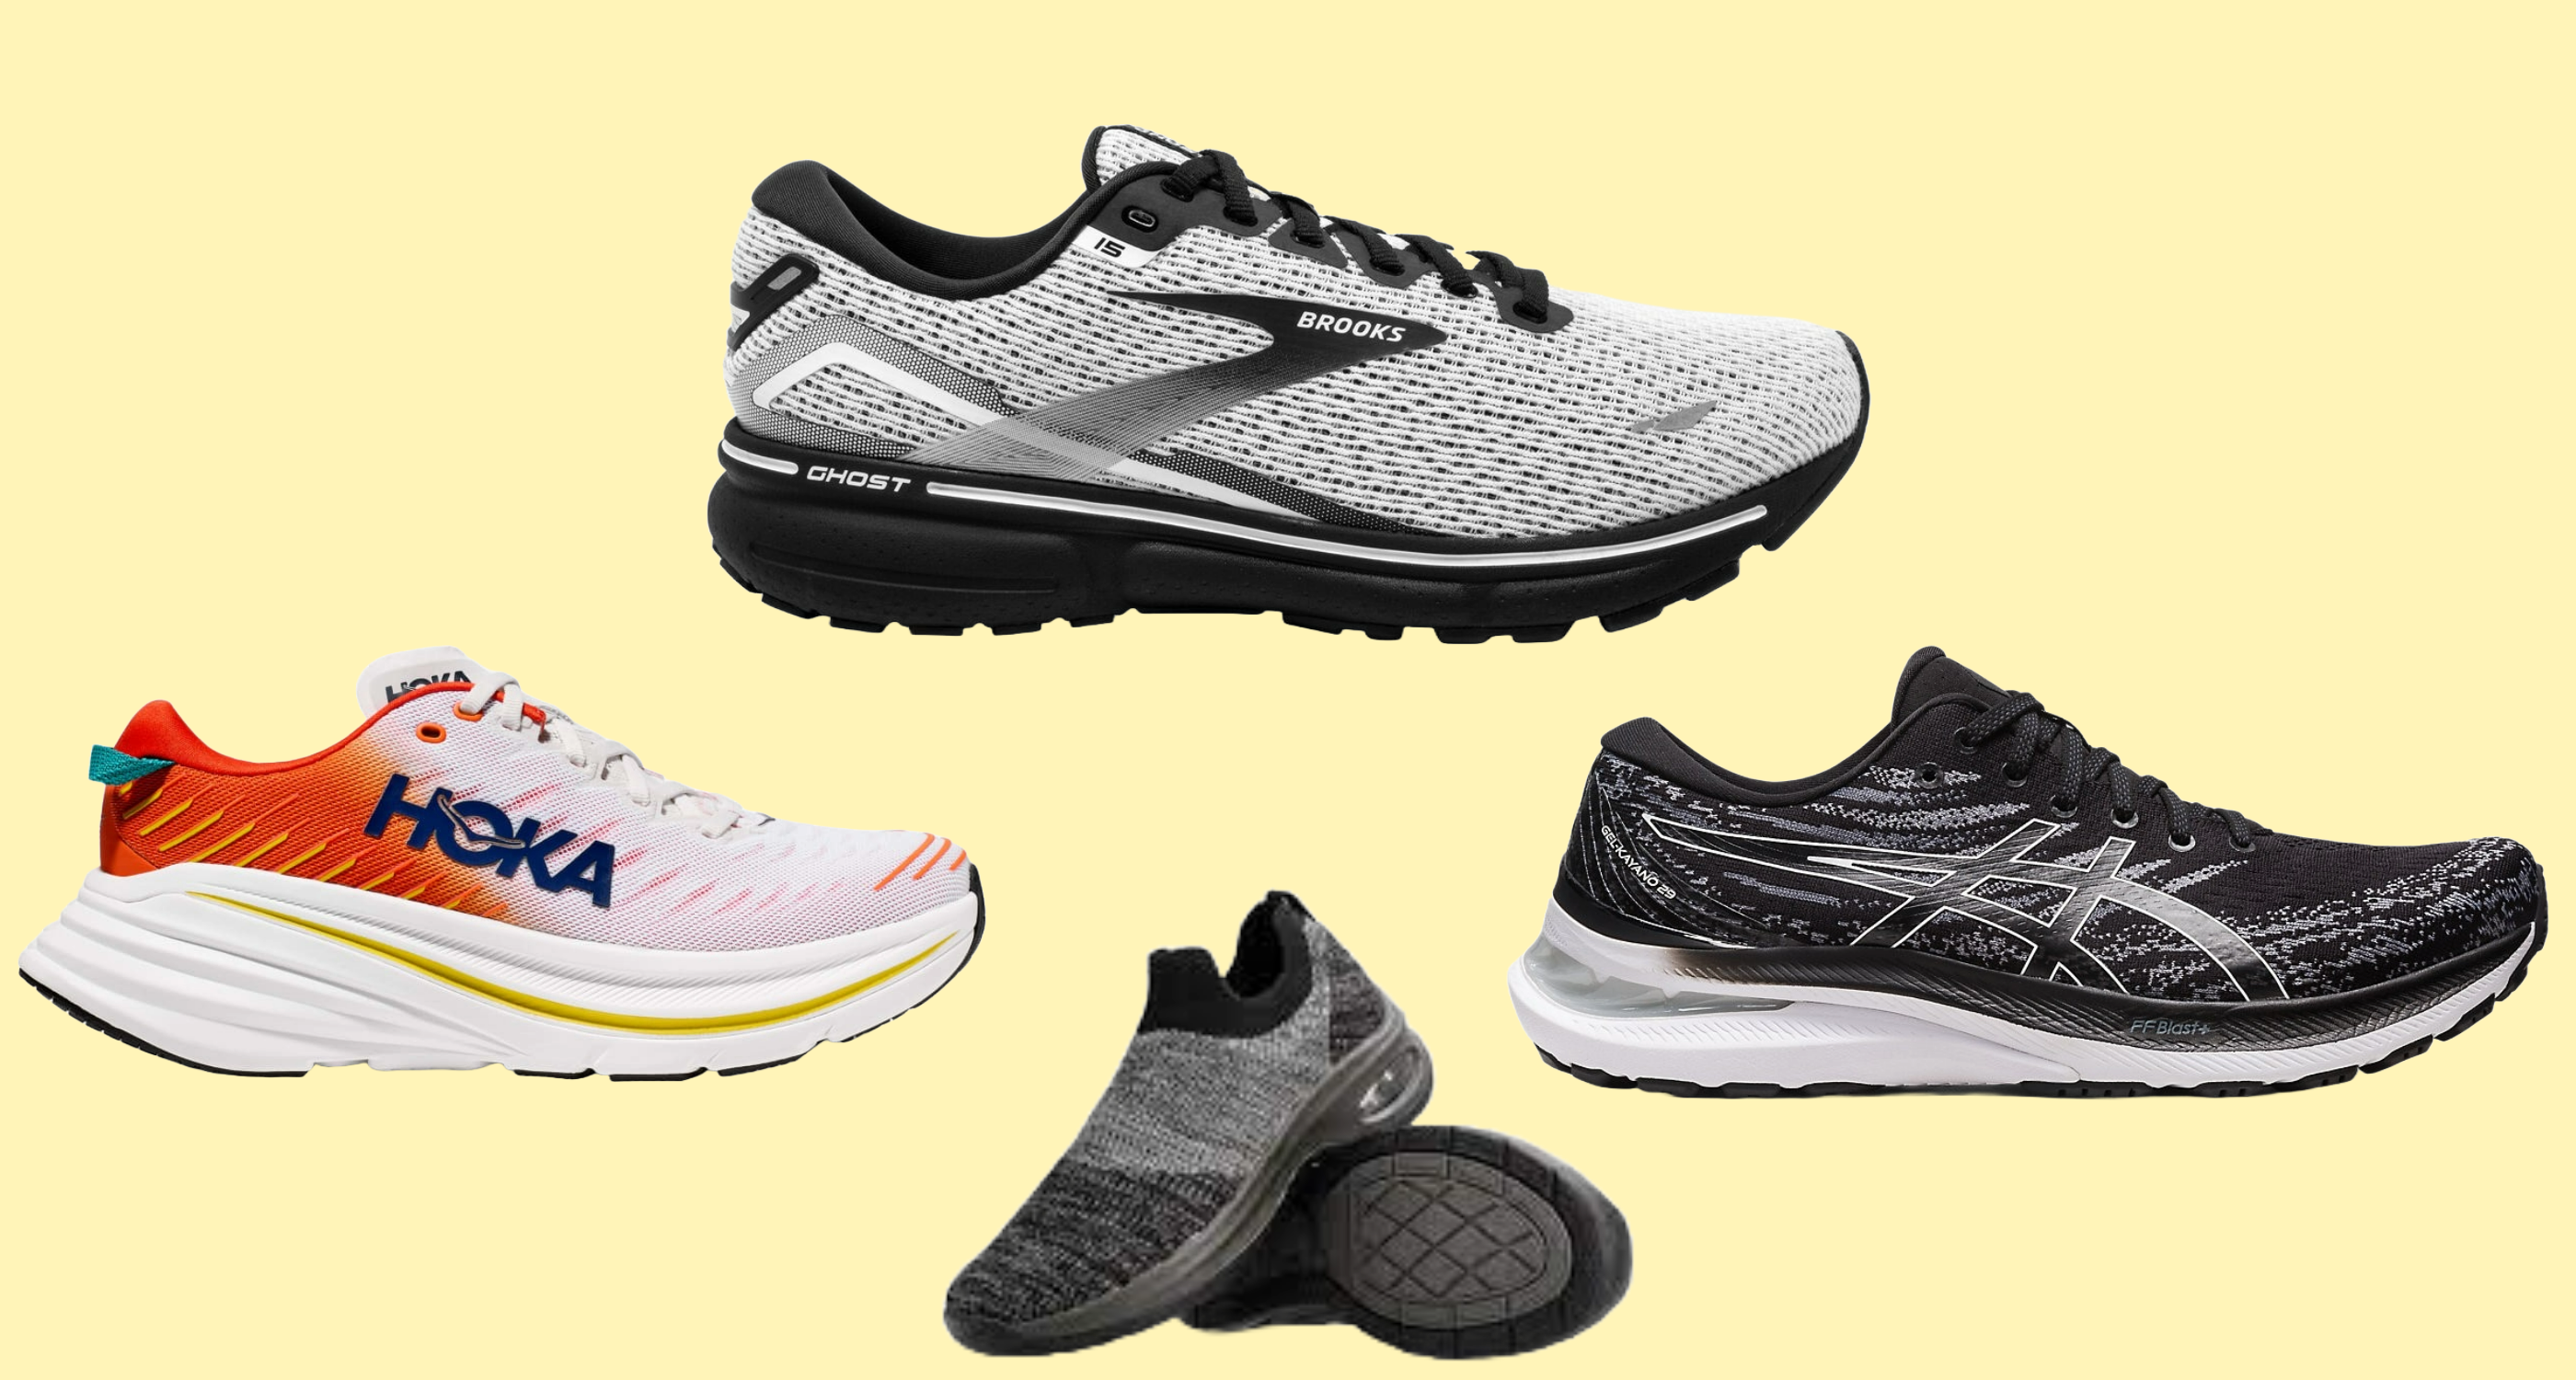 The best shoes for plantar fasciitis, according to podiatrists